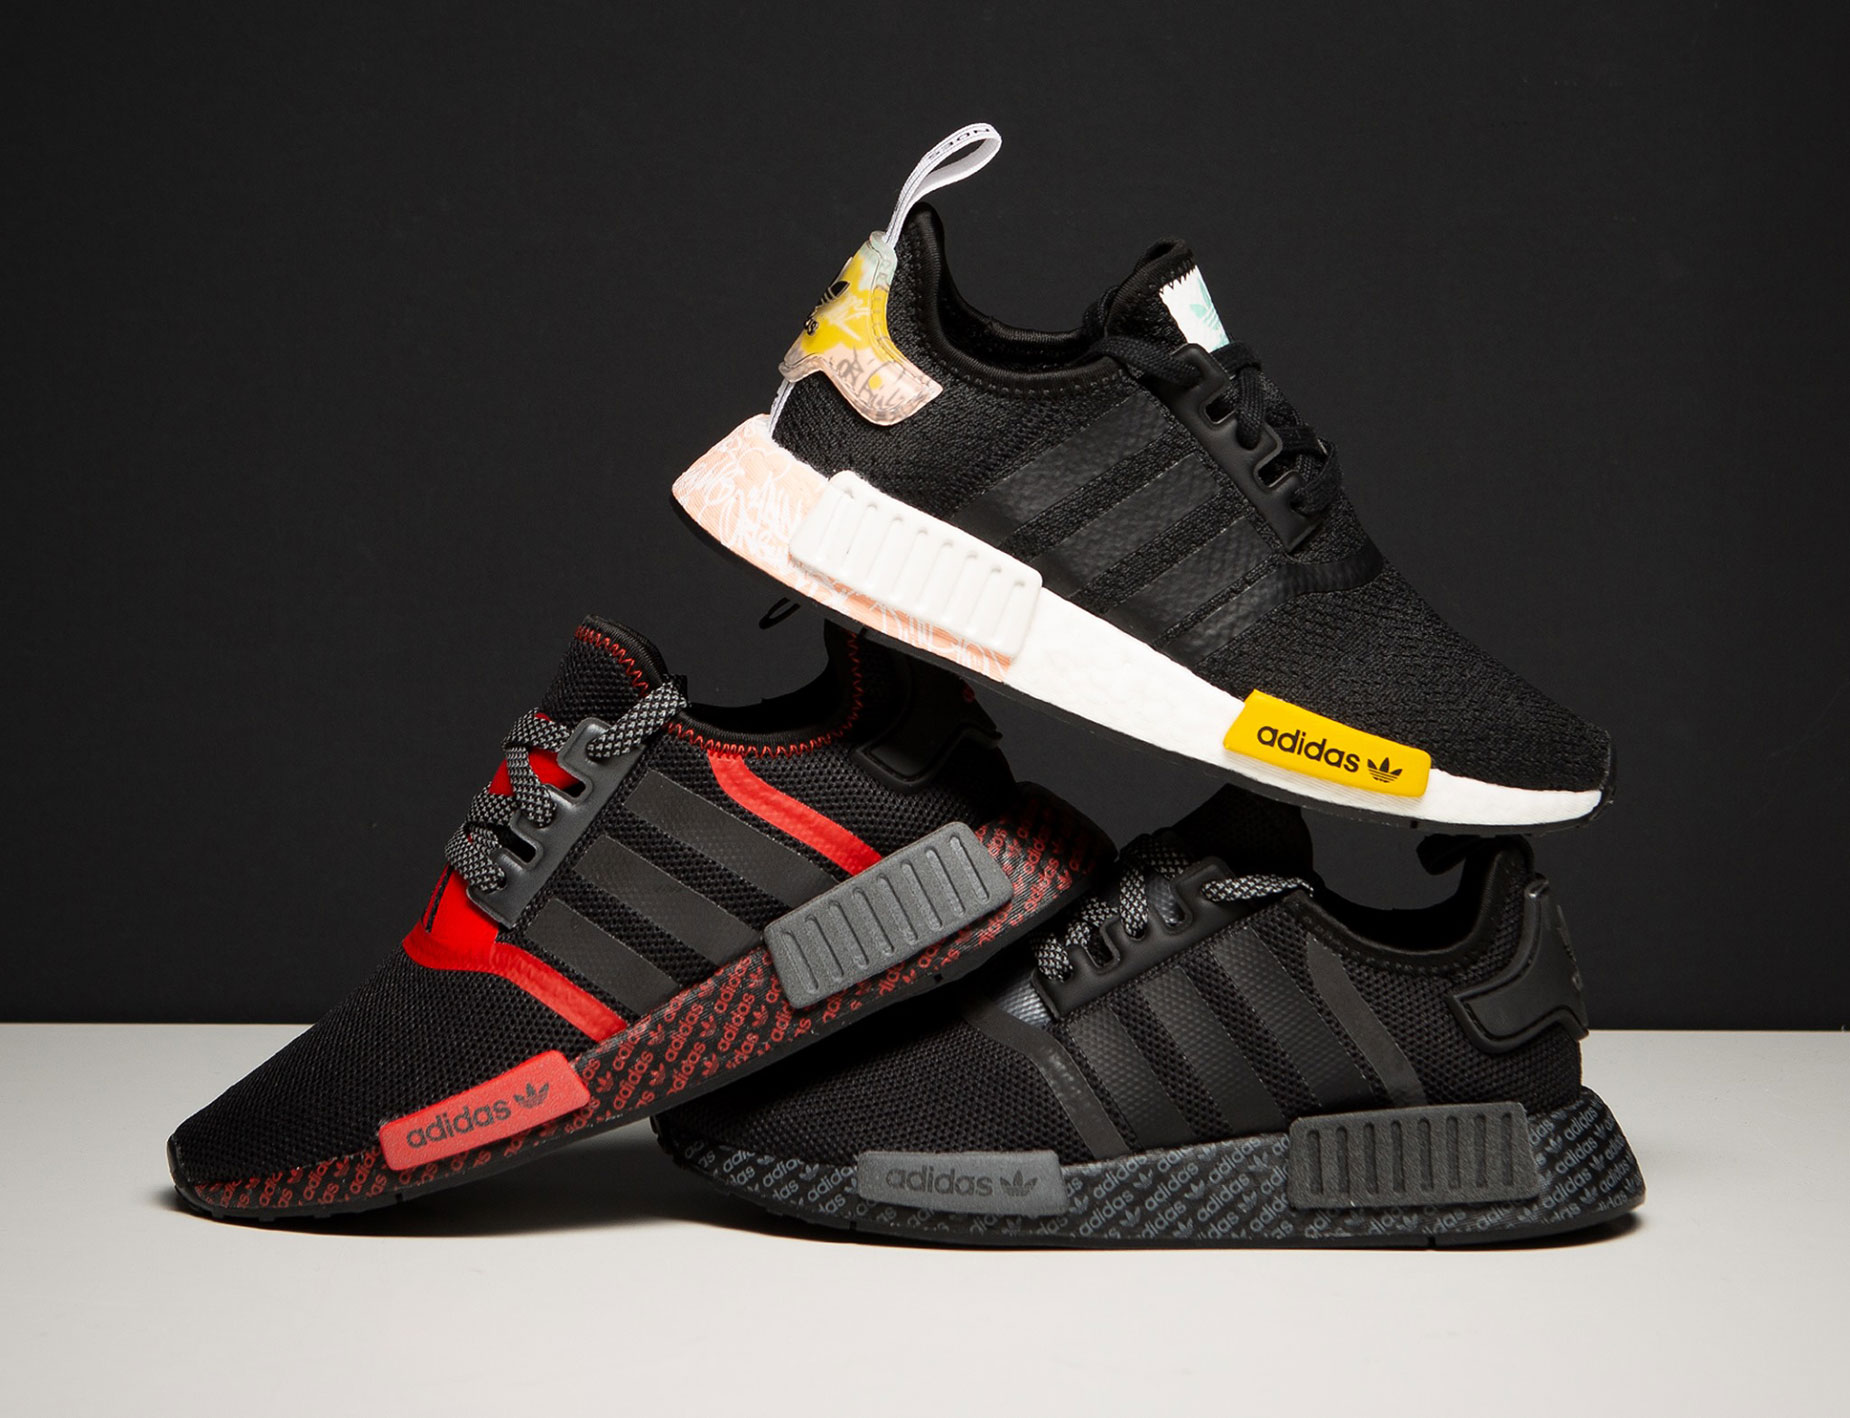 adidas NMD R1 Stripes Black White For Sale The Sole Line